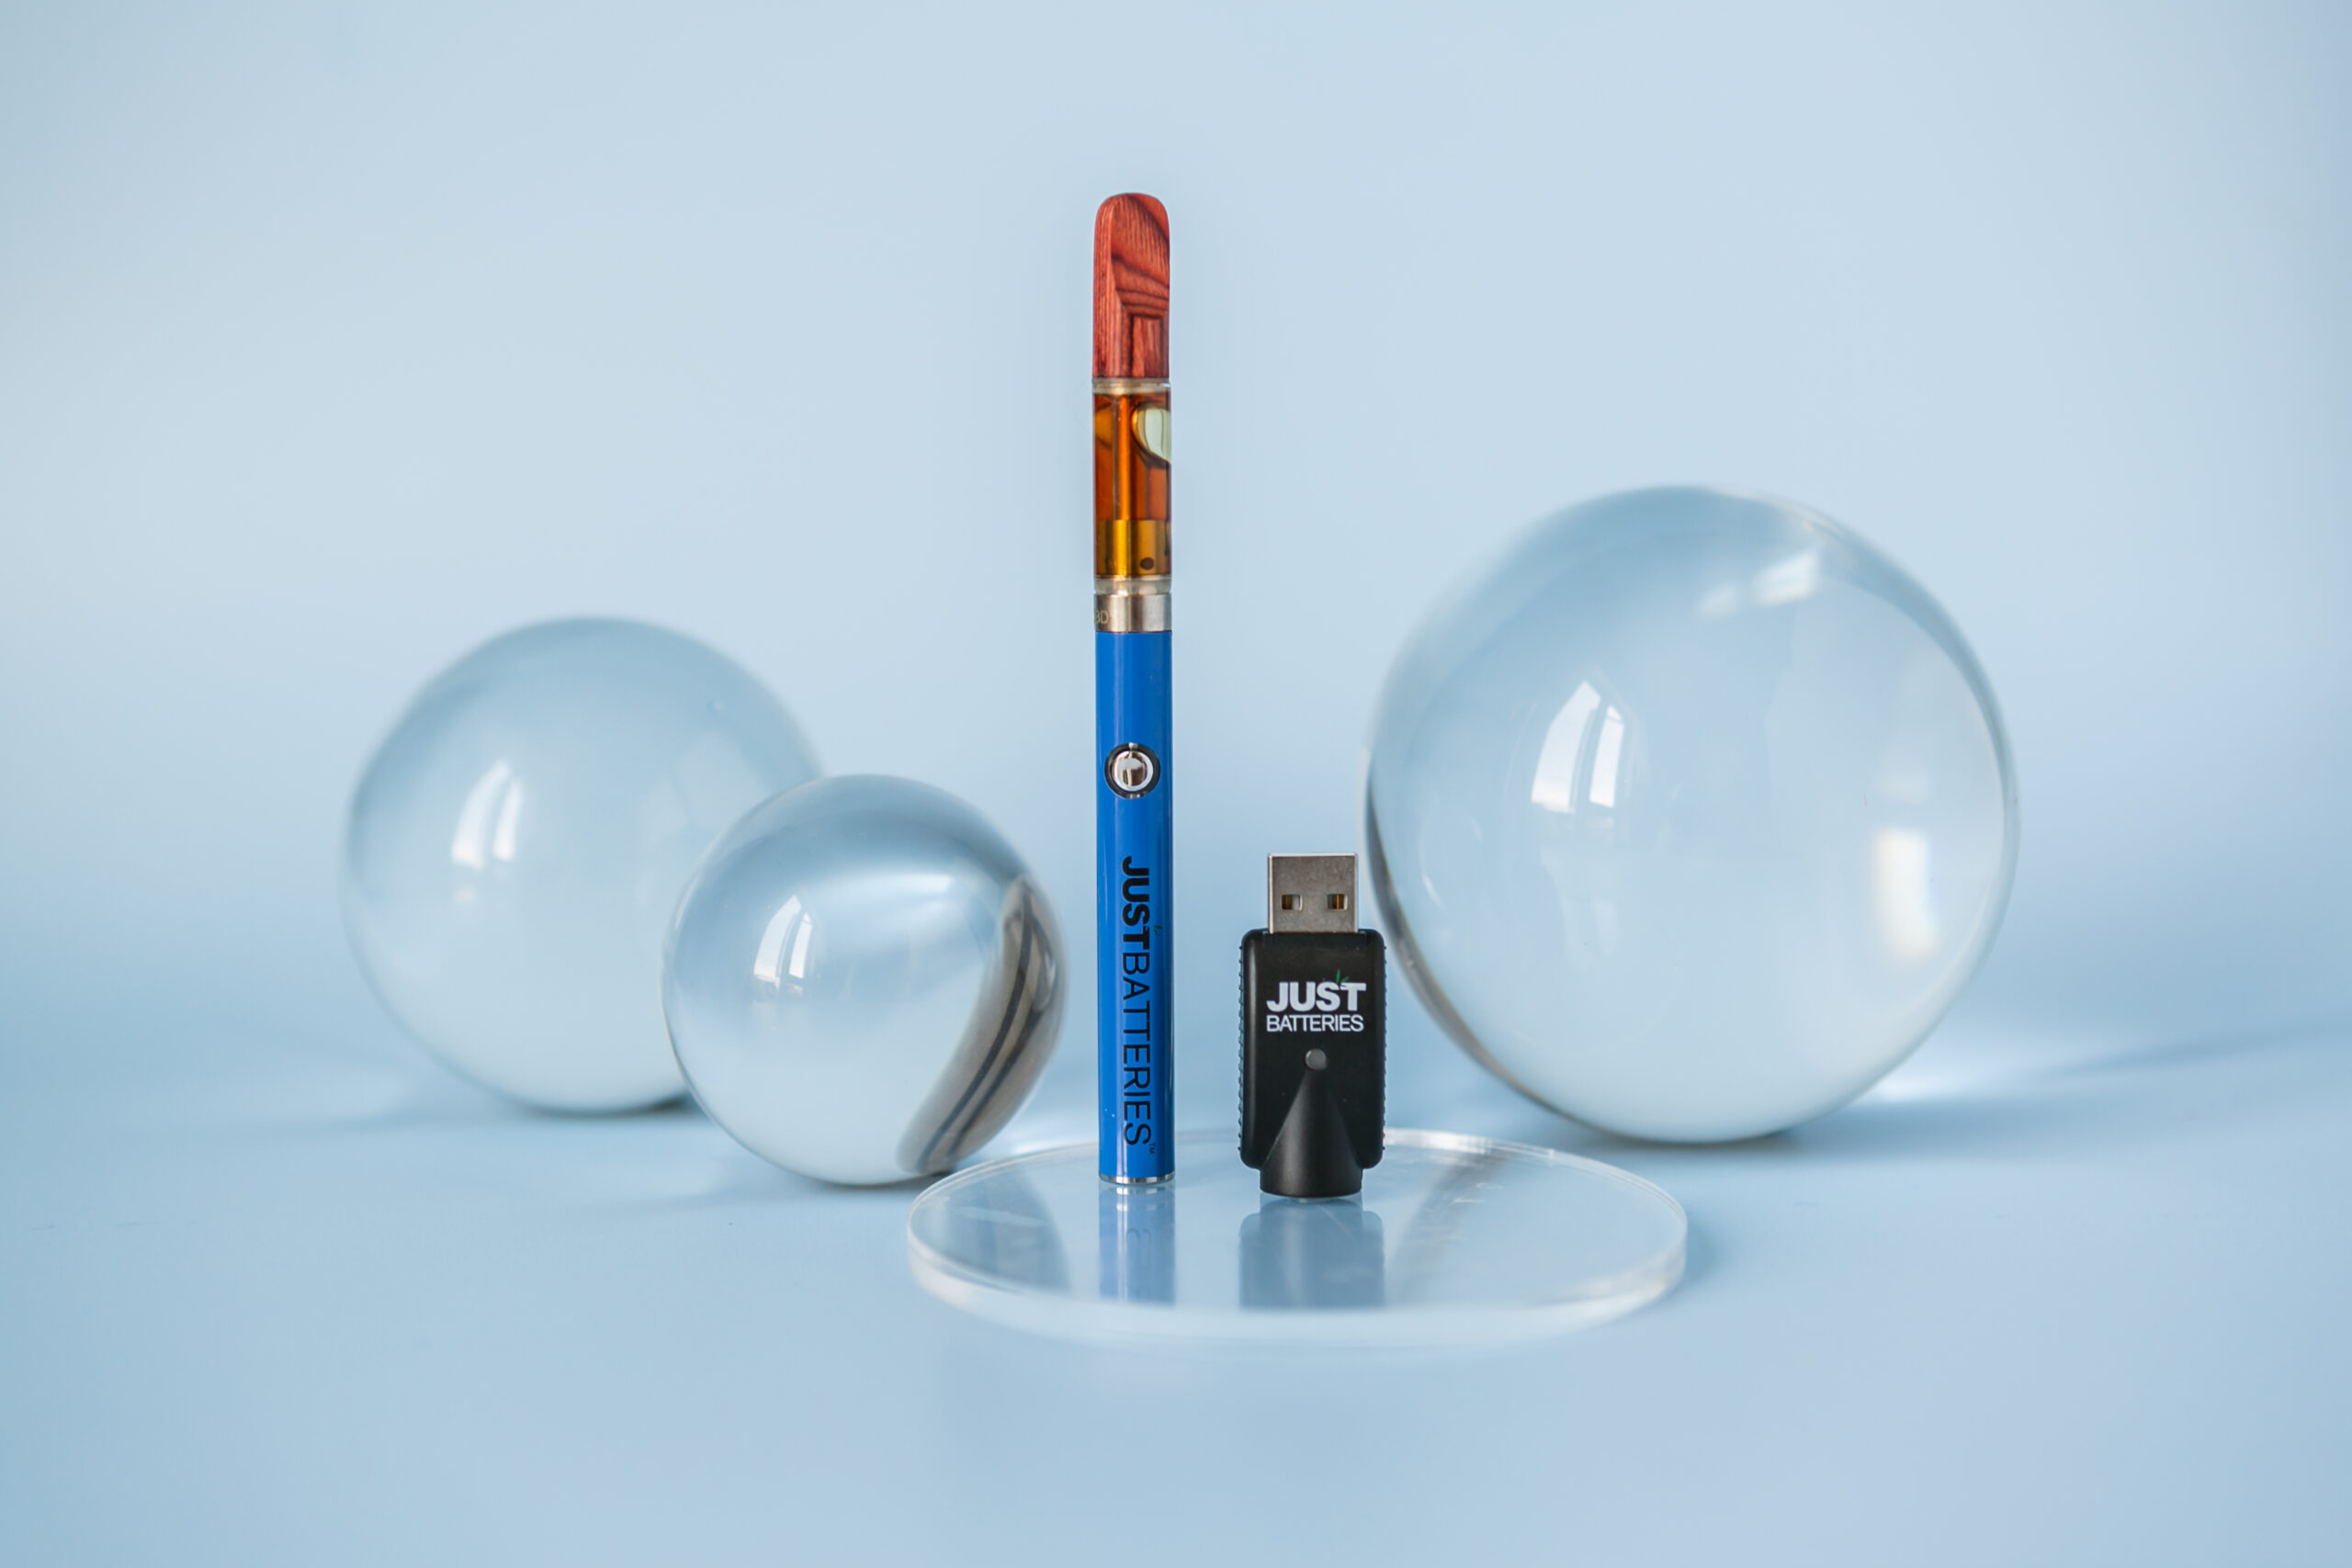 WHEN IS THE BEST TIME TO USE A CBD VAPE PEN?